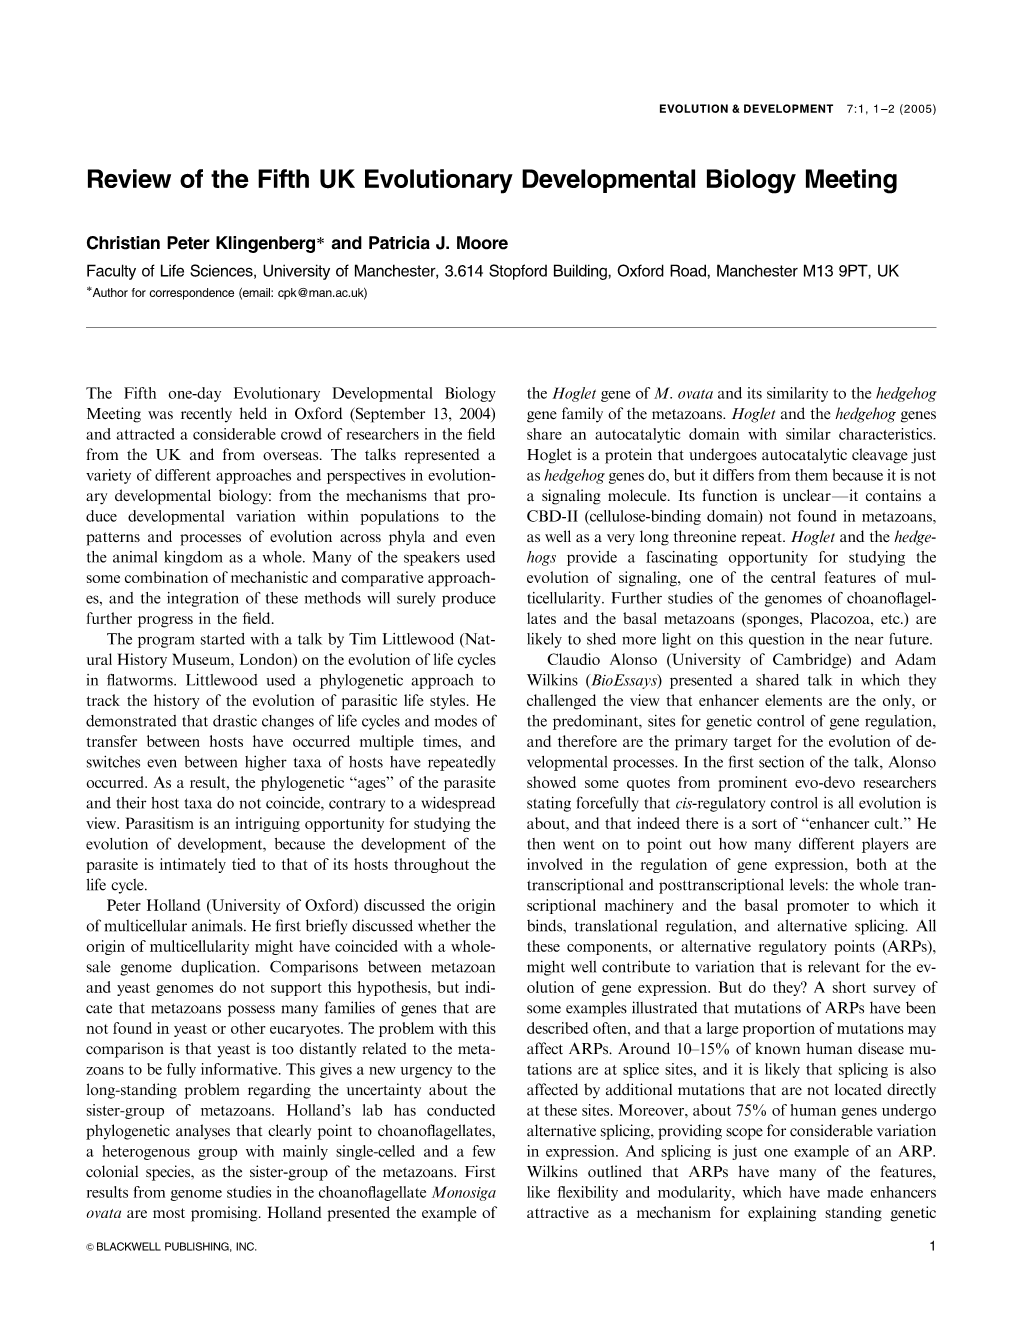 Review of the Fifth UK Evolutionary Developmental Biology Meeting